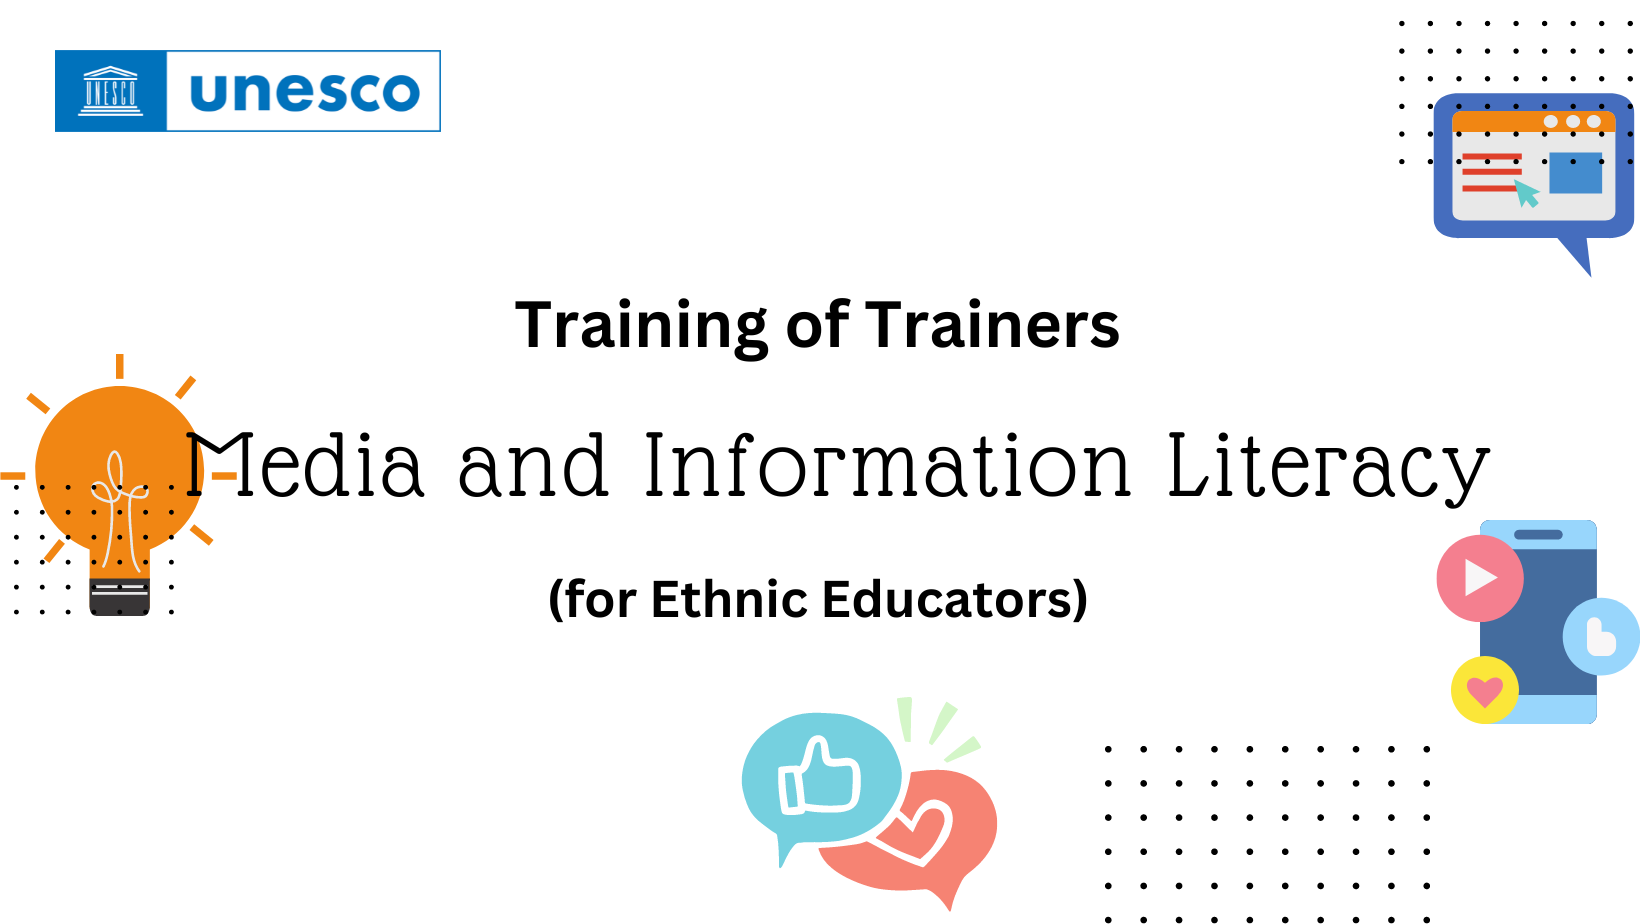 Training of Trainers on Media and Information Literacy (for Ethnic Educators)﻿